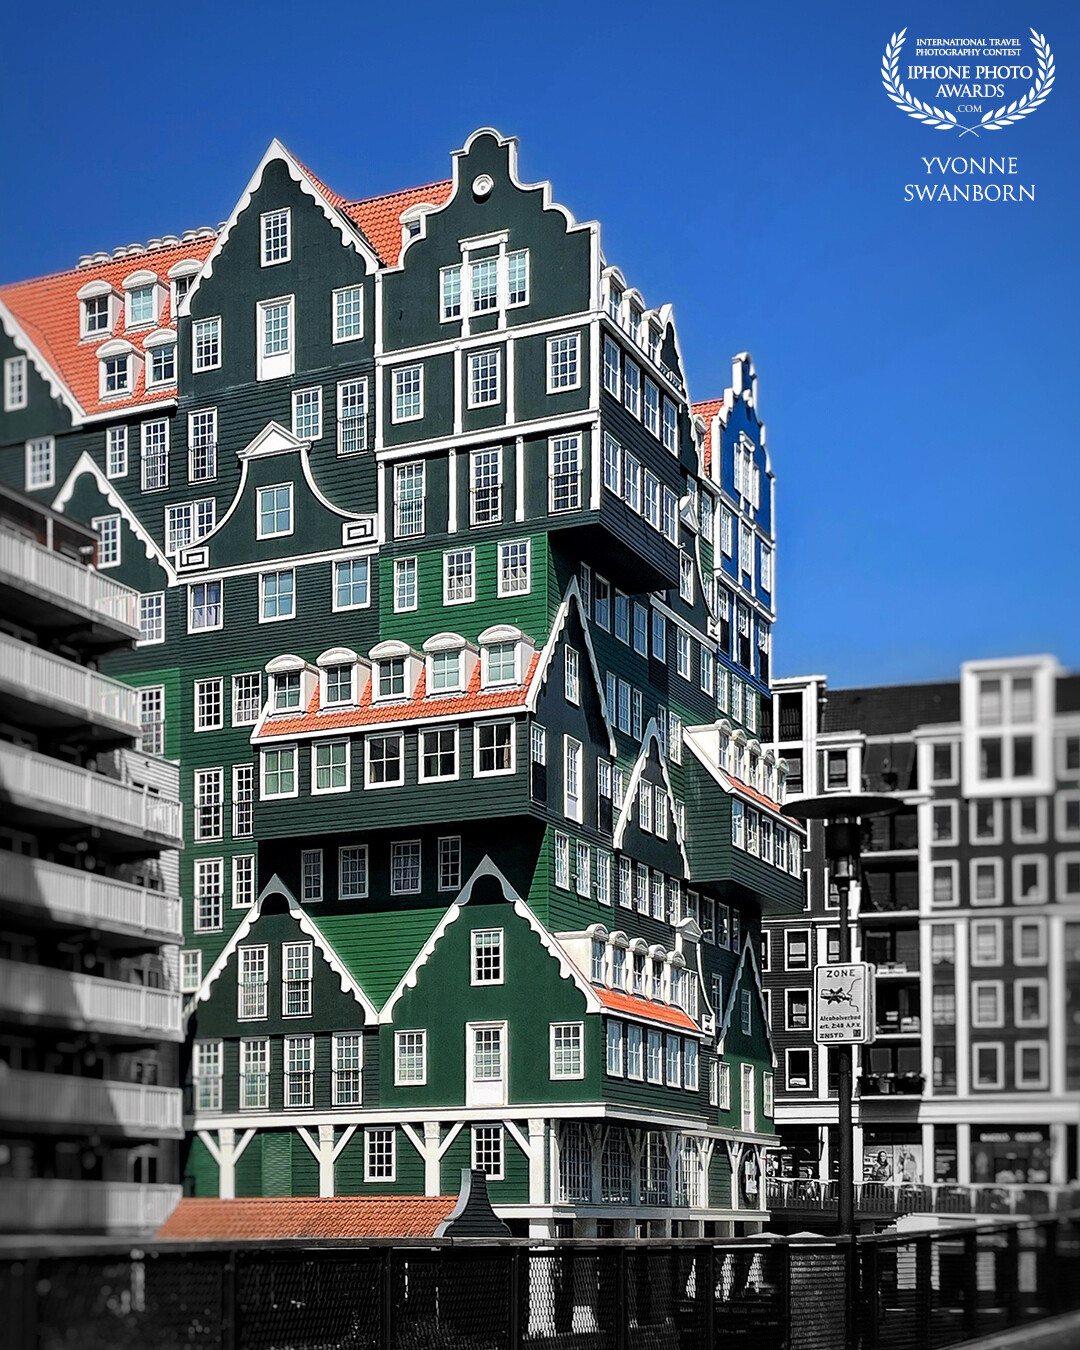 I visited Zaandam and the ‘Zaanse Schans’ because I had never been there and it is so beautiful. This hotel in Zaandam (Netherlands) is build like all the green houses in that area.